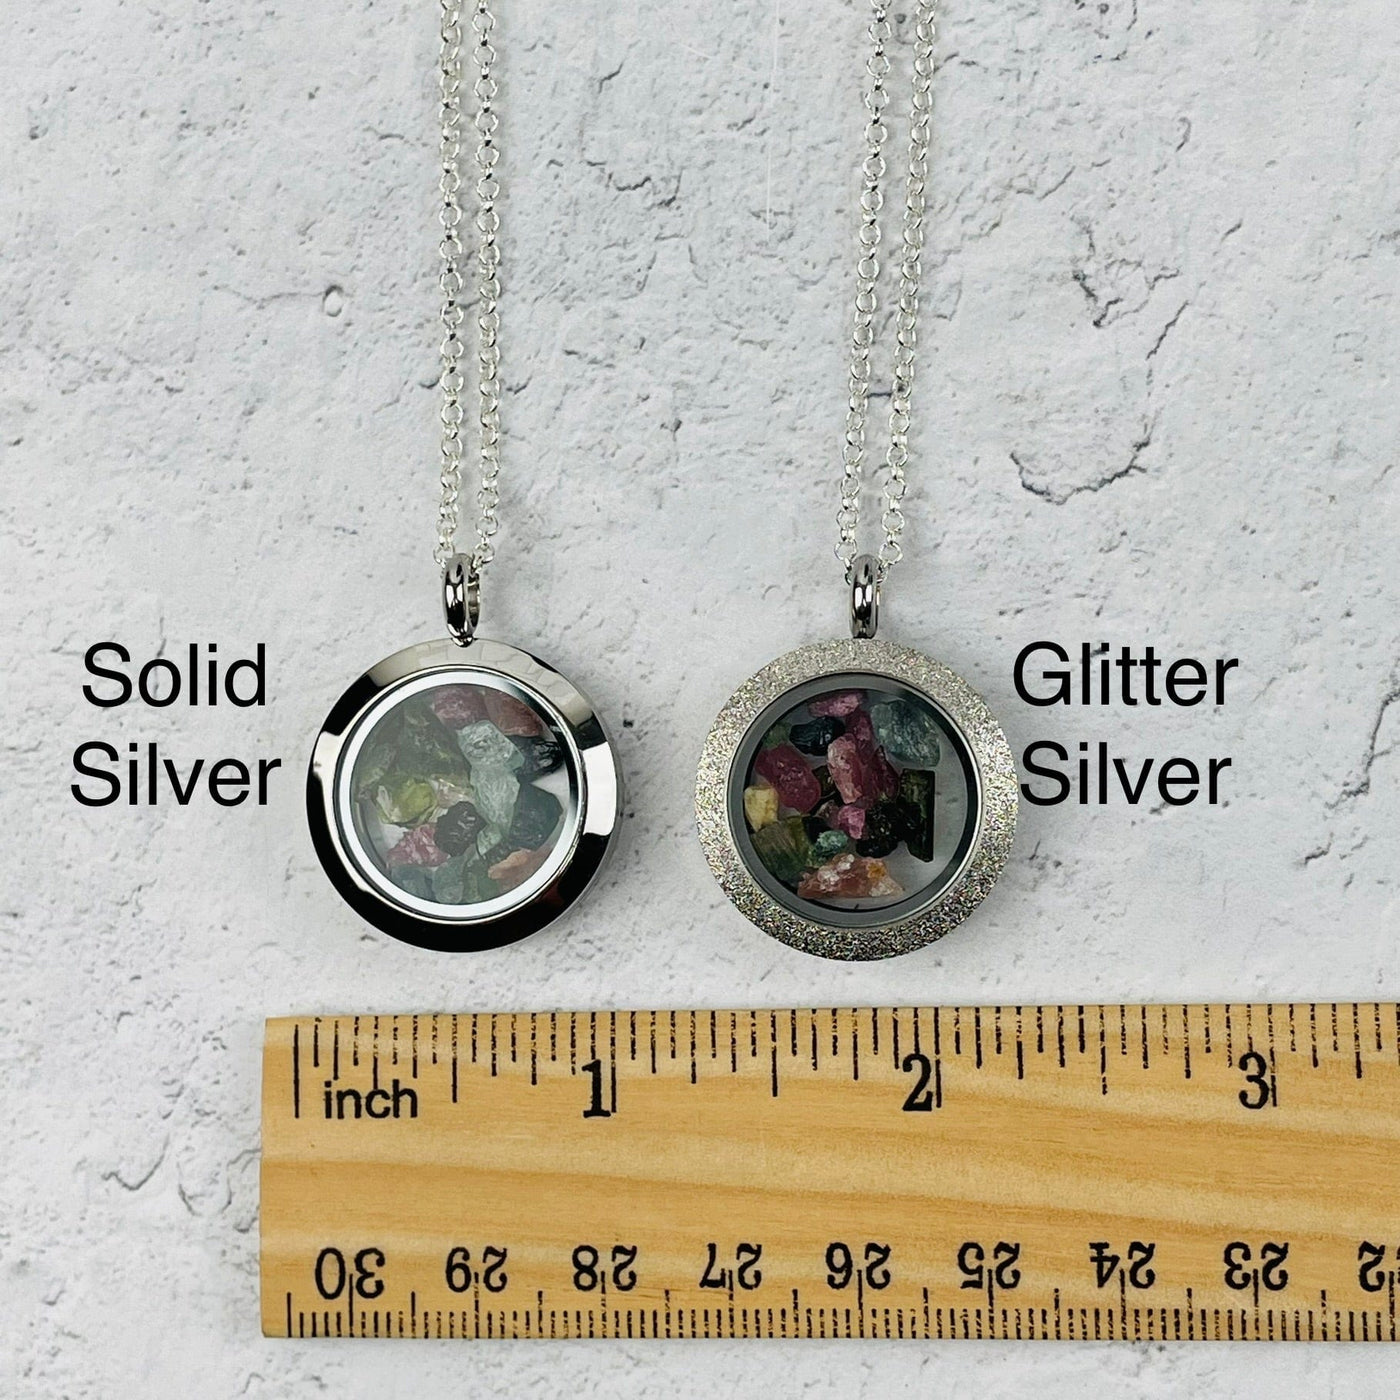 pendant available in solid silver color or glitter silver. next to a ruler for size reference 